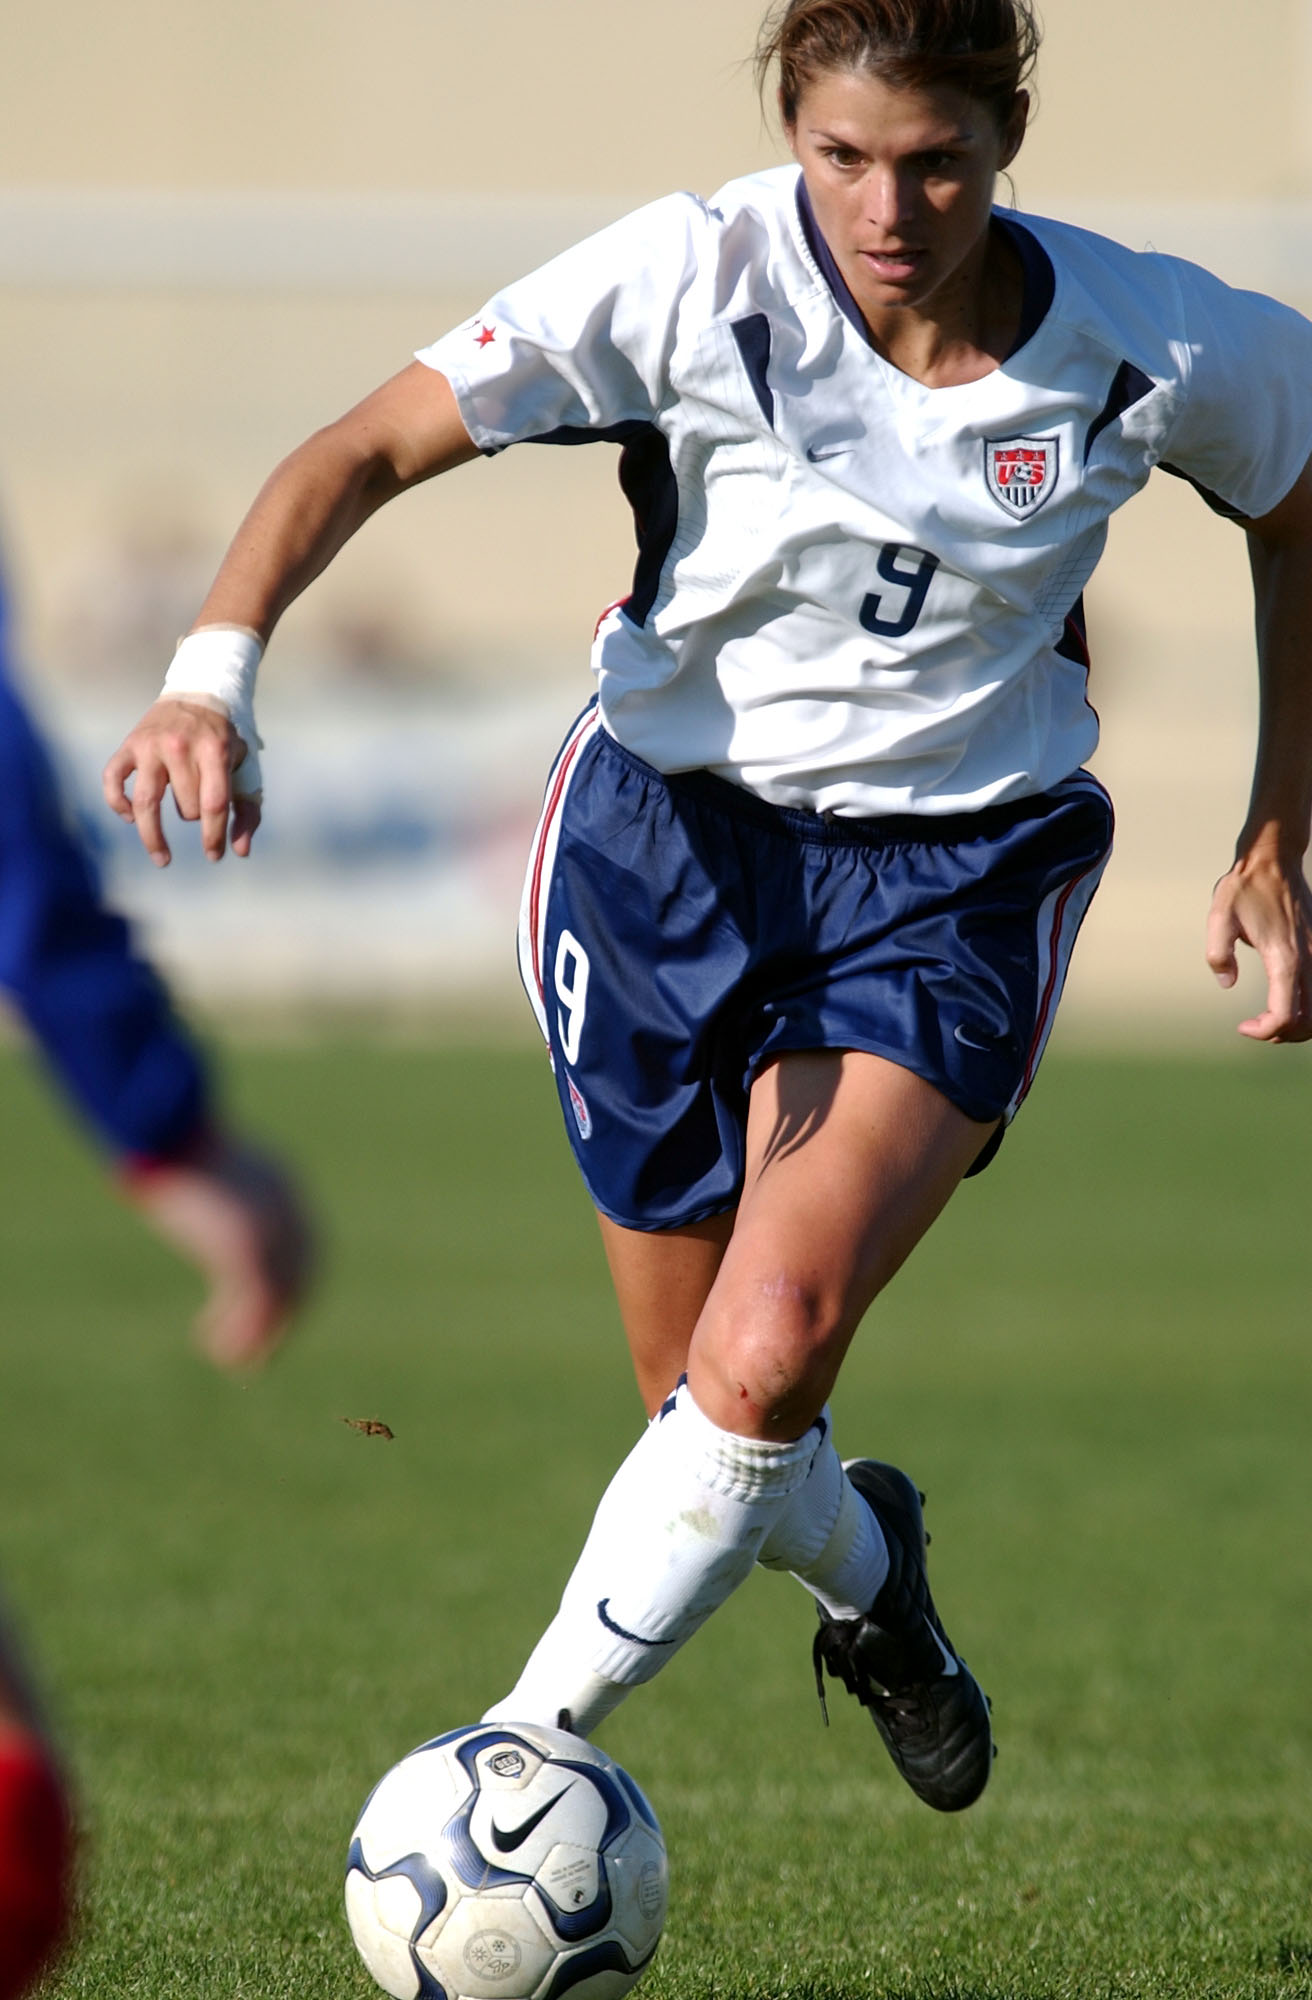 US Soccer player Mia Hamm plays in Algarve Cup in Portugal in 2004